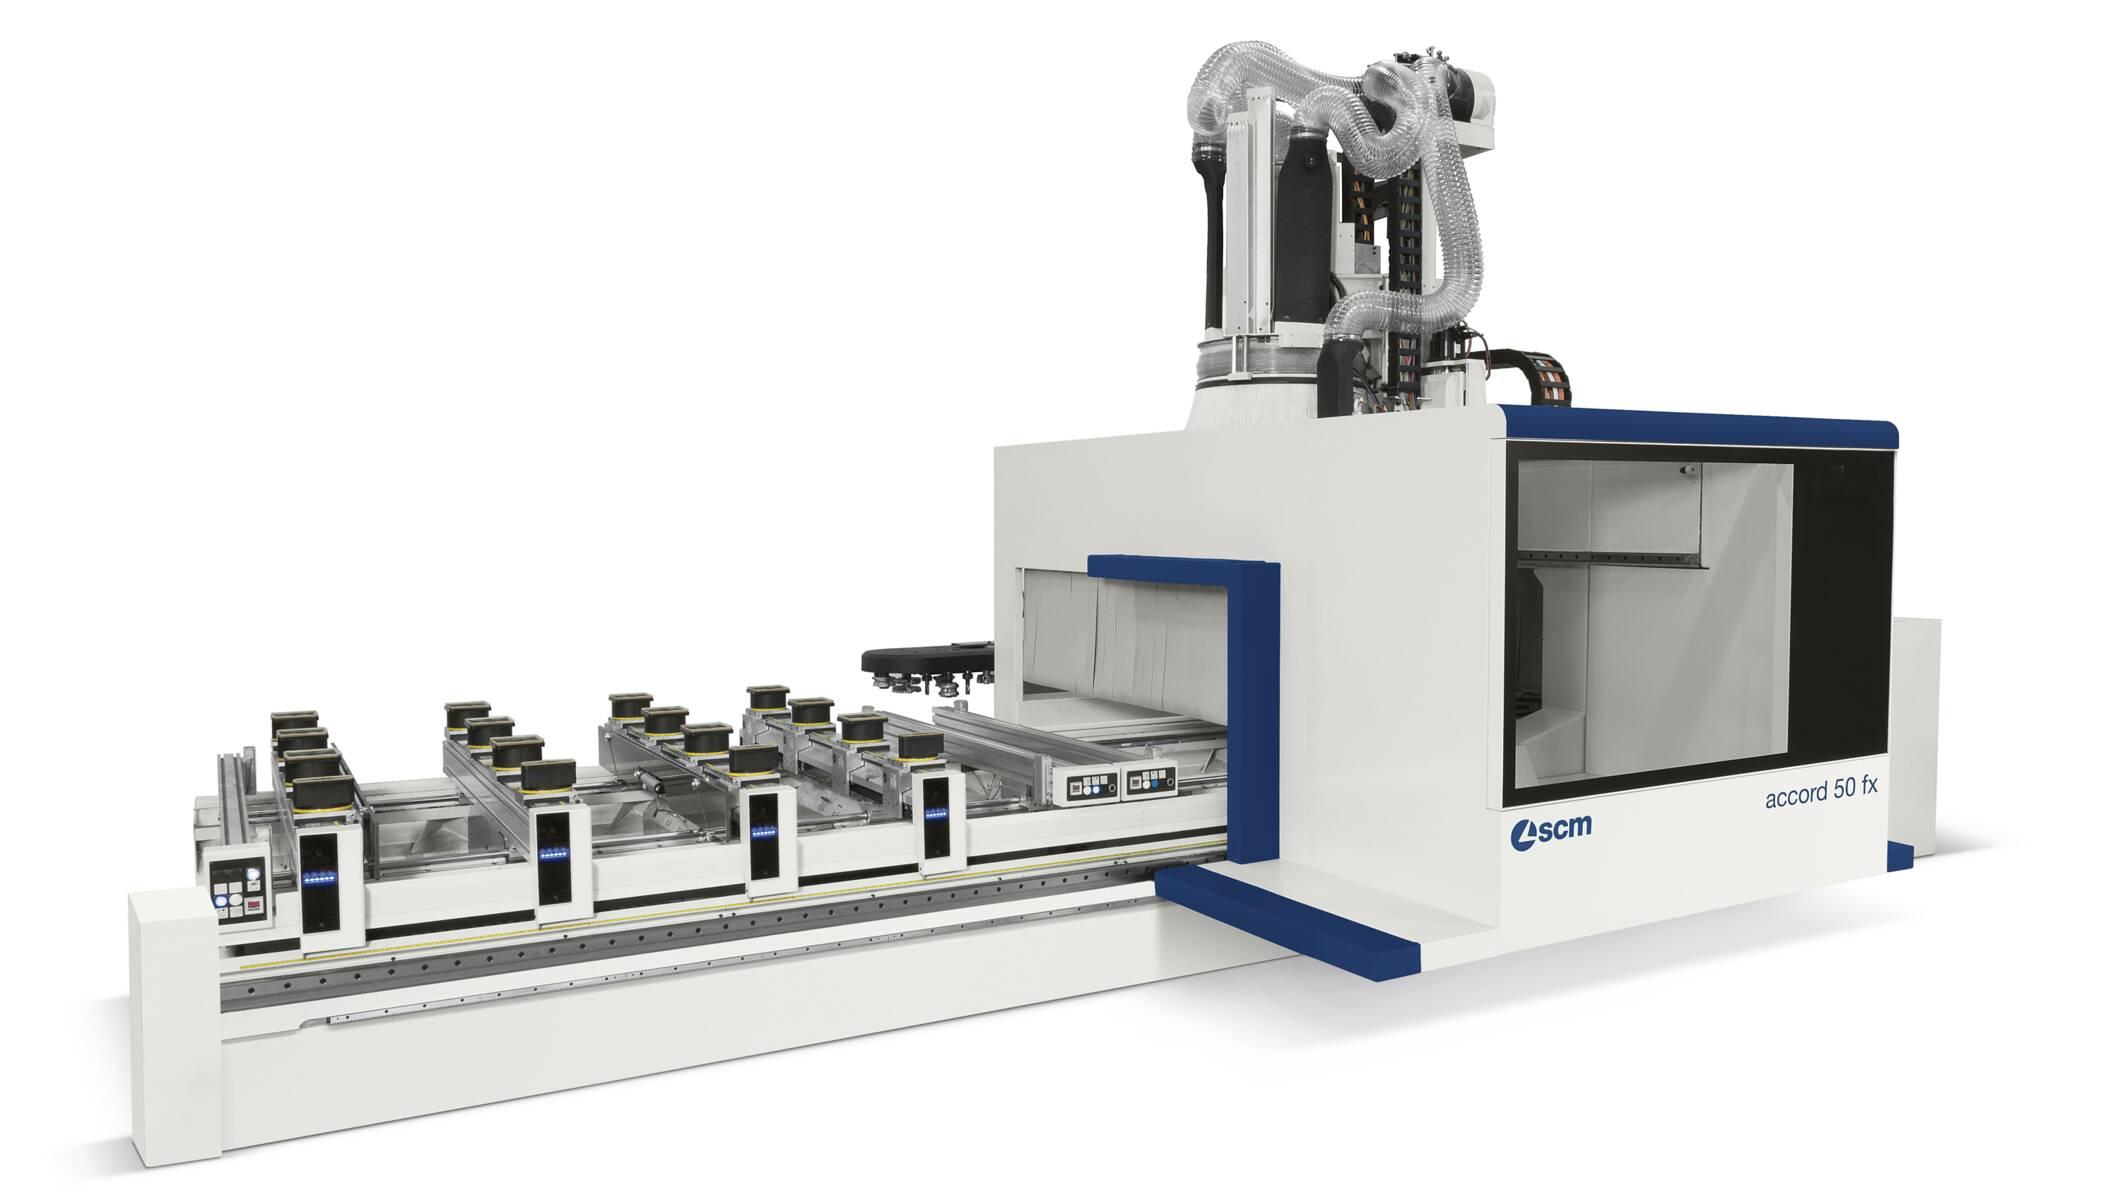 CNC Machining Centres - CNC Machining Centres for routing and drilling - accord 50 fx